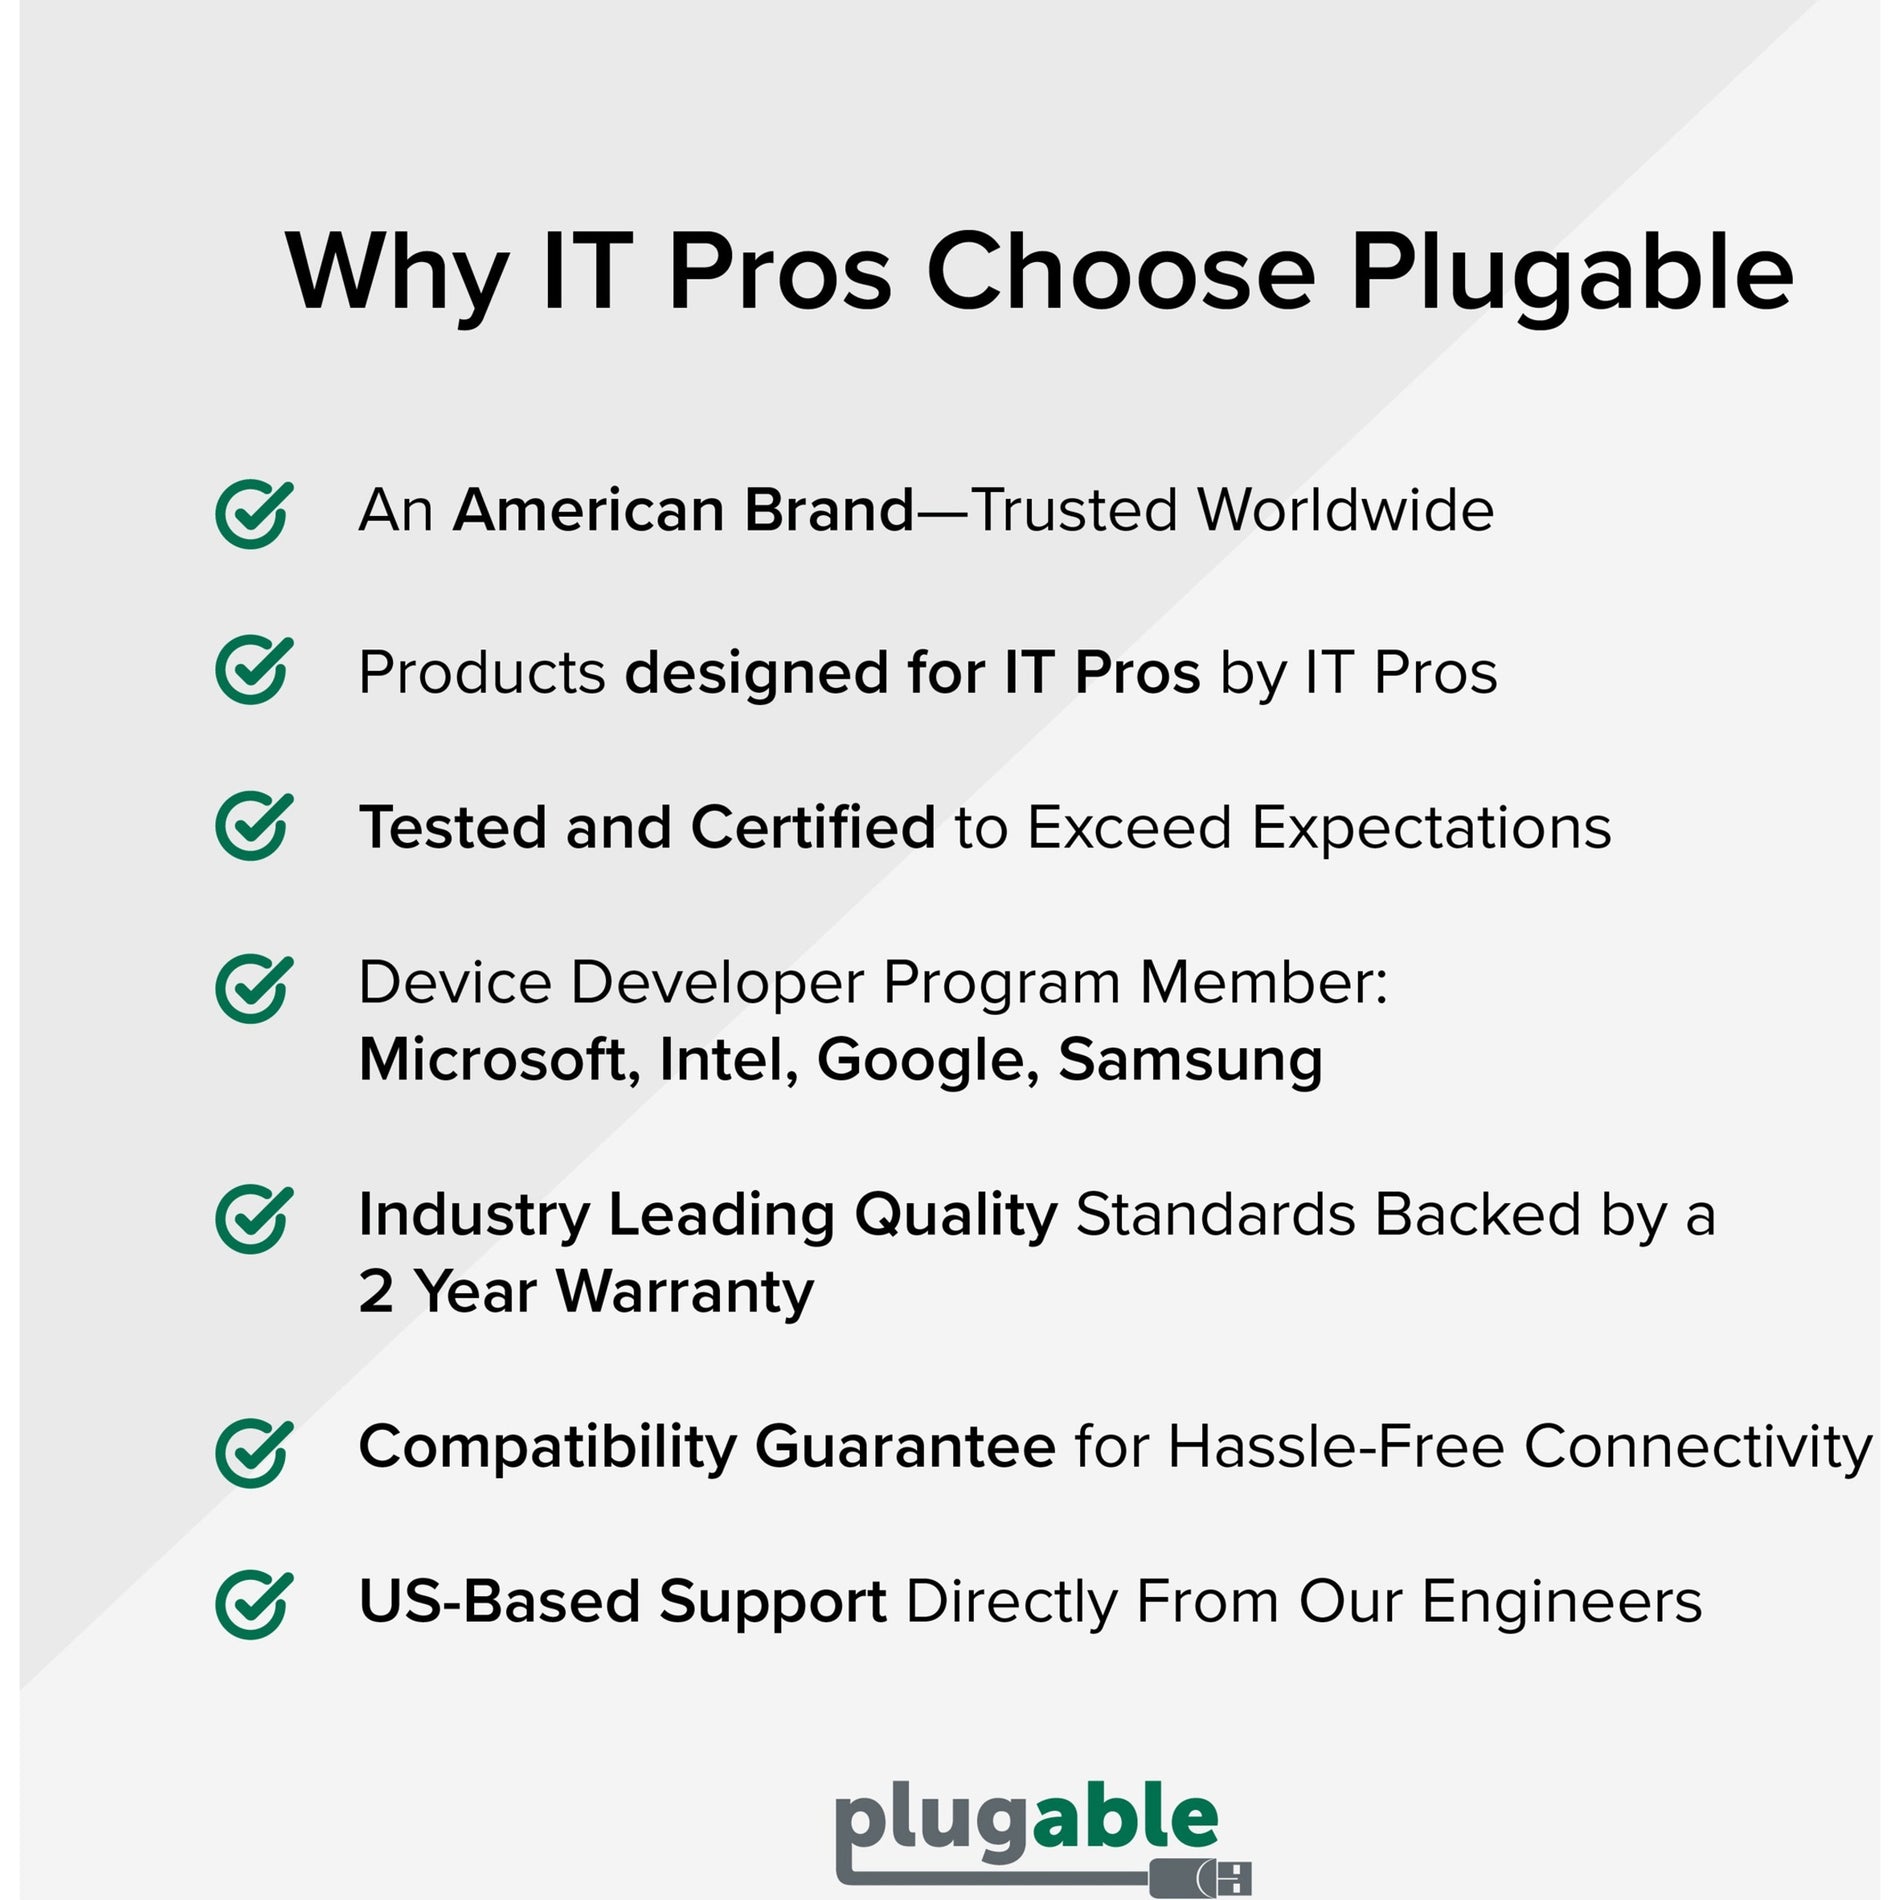 Plugable USB2-OTGE100 USB 2.0 OTG Micro-B to 100Mbps Fast Ethernet Adapter, Portable and Easy-to-Use